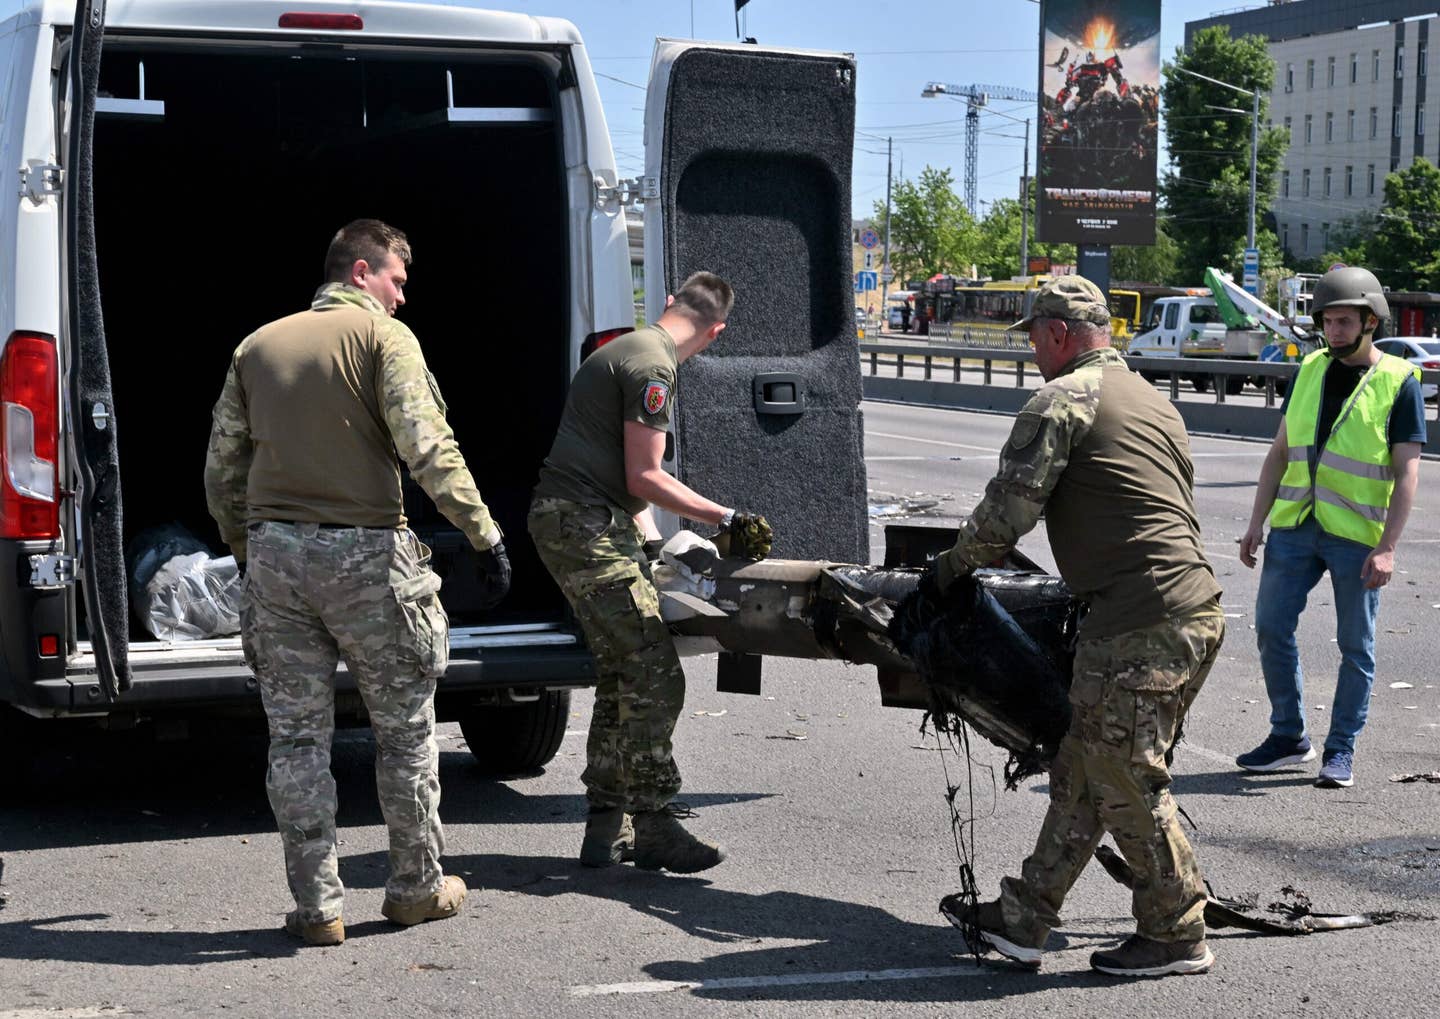 Police experts load fragments of a missile into a car after Russia fired a barrage of missiles for the second time in 24 hours, in an unusual daytime attack on the Ukrainian capital following overnight strikes on May 29, 2023. (Photo by SERGEI SUPINSKY/AFP via Getty Images)